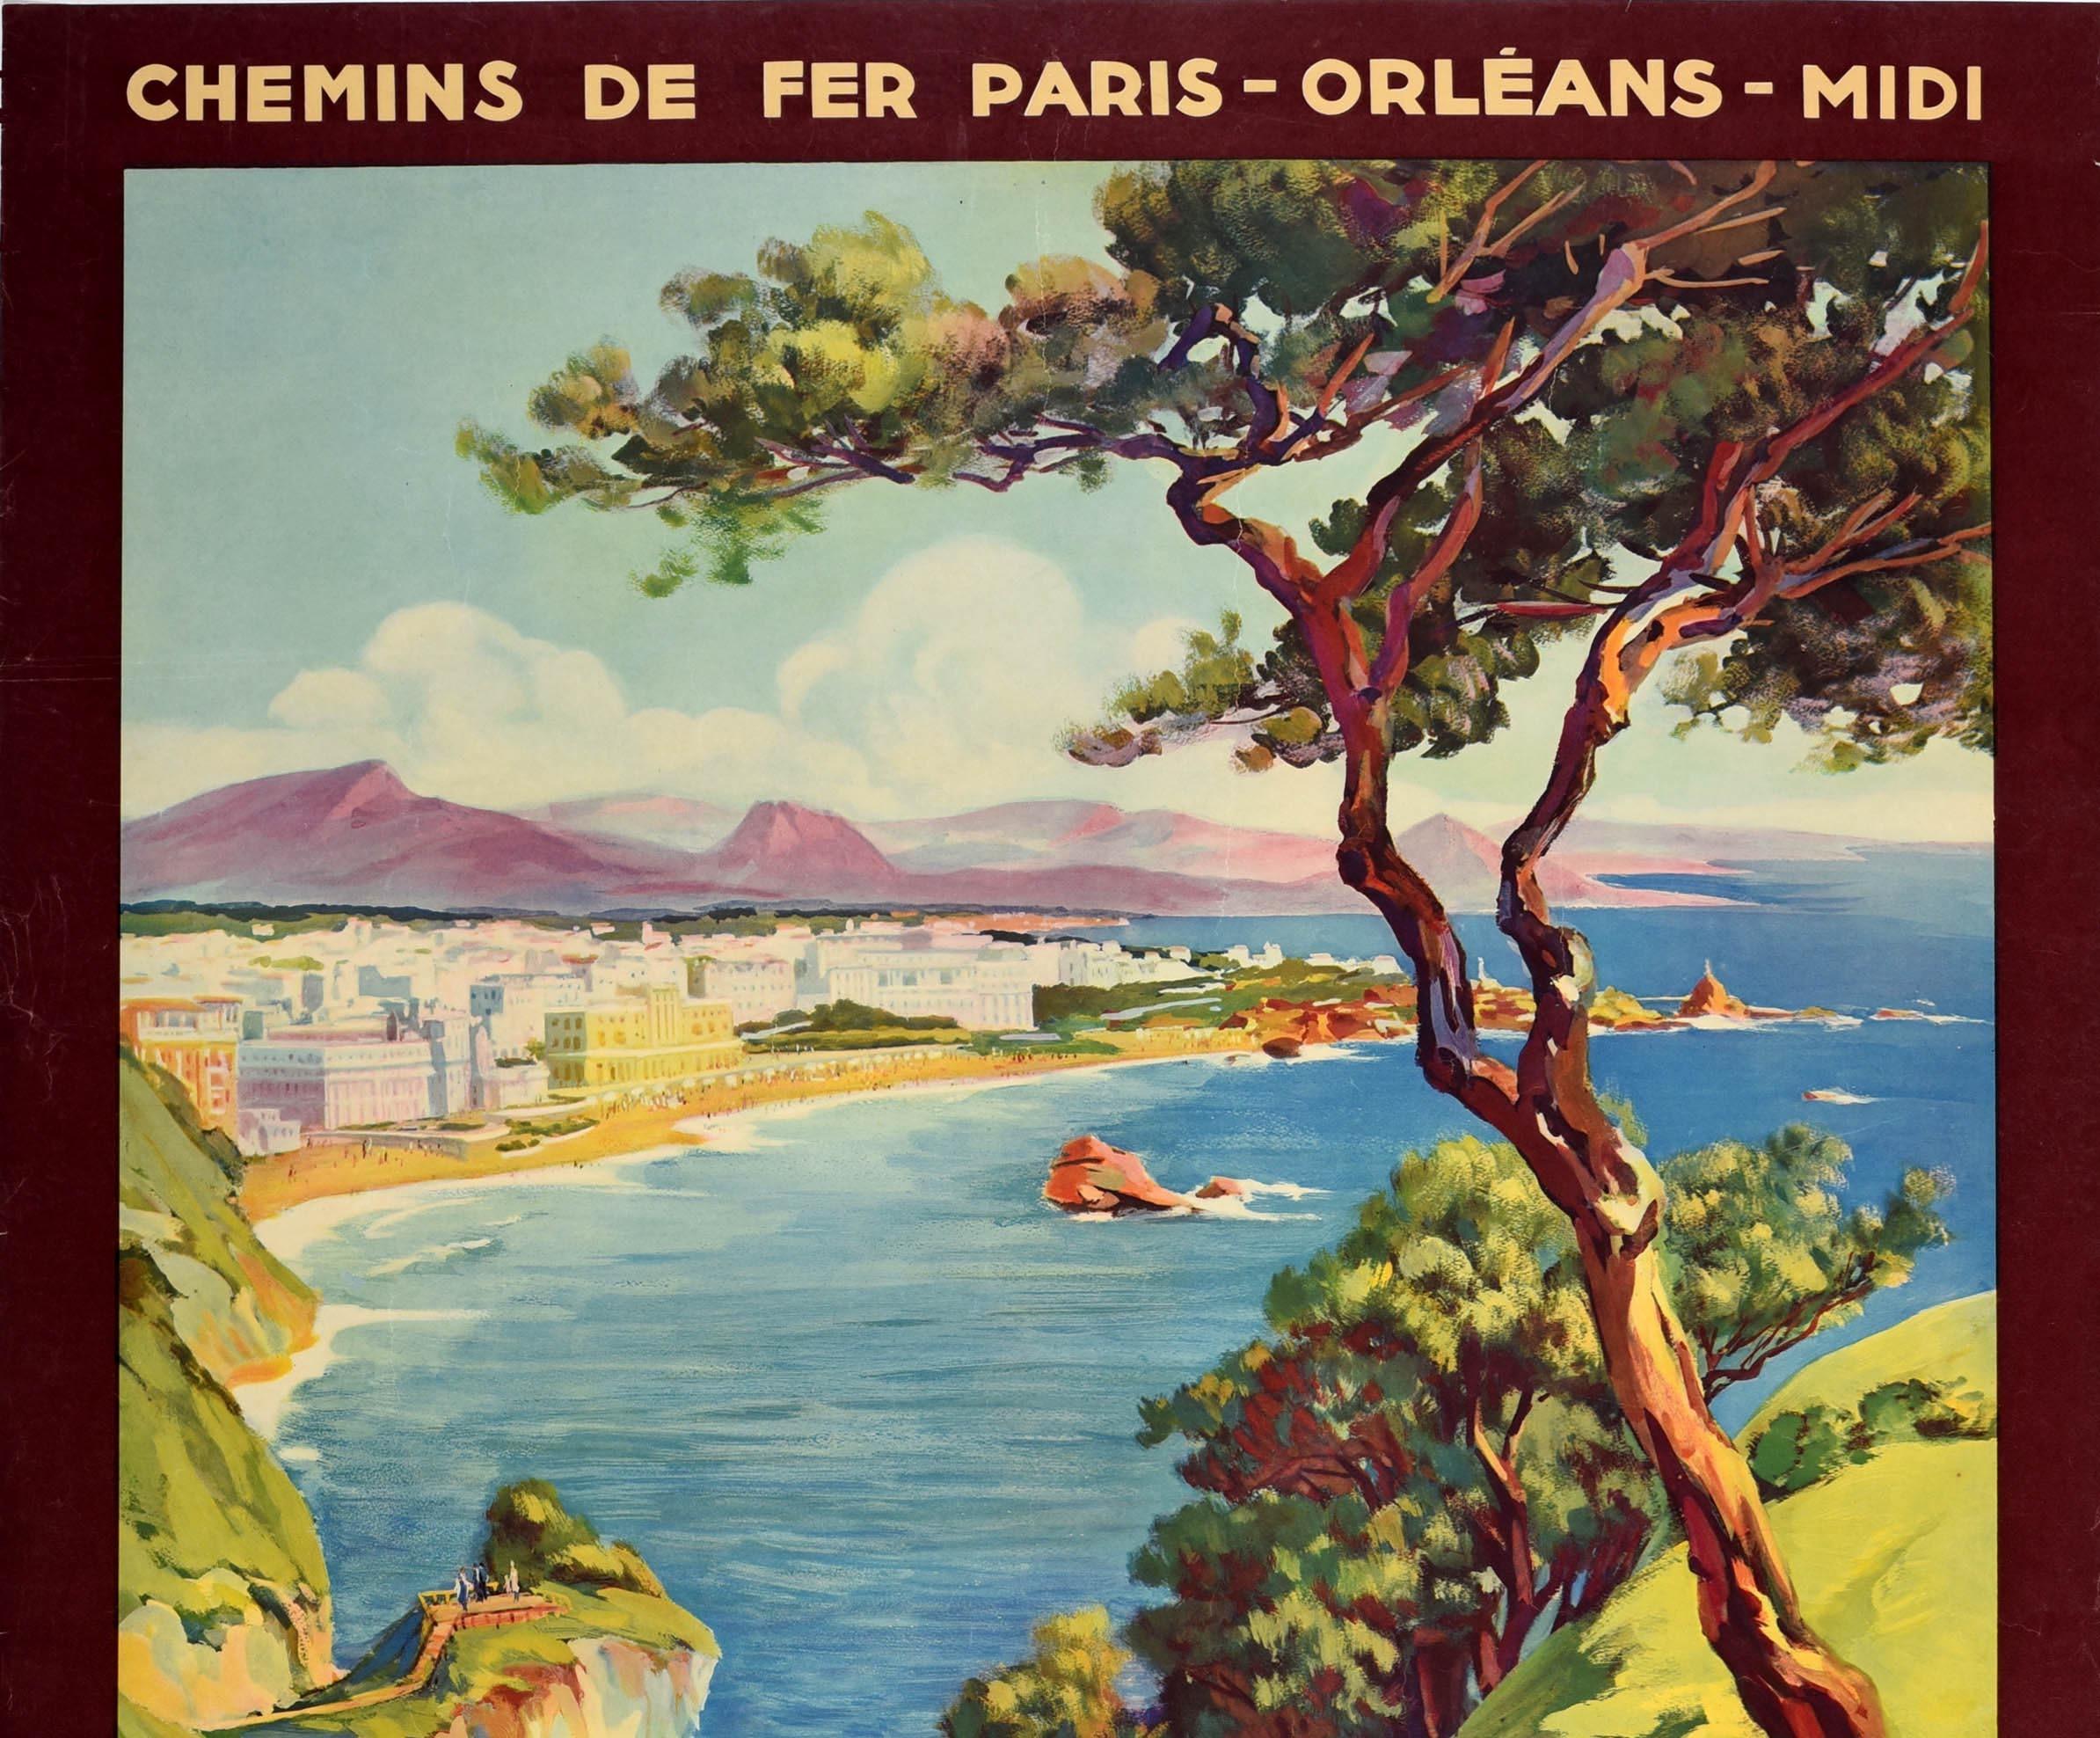 Original vintage railway travel poster for Biarritz featuring a scenic view over the coast depicting a couple walking down the path by flowers and trees in the foreground, the rocky cliffs leading round to people on a sandy beach and swimming in the